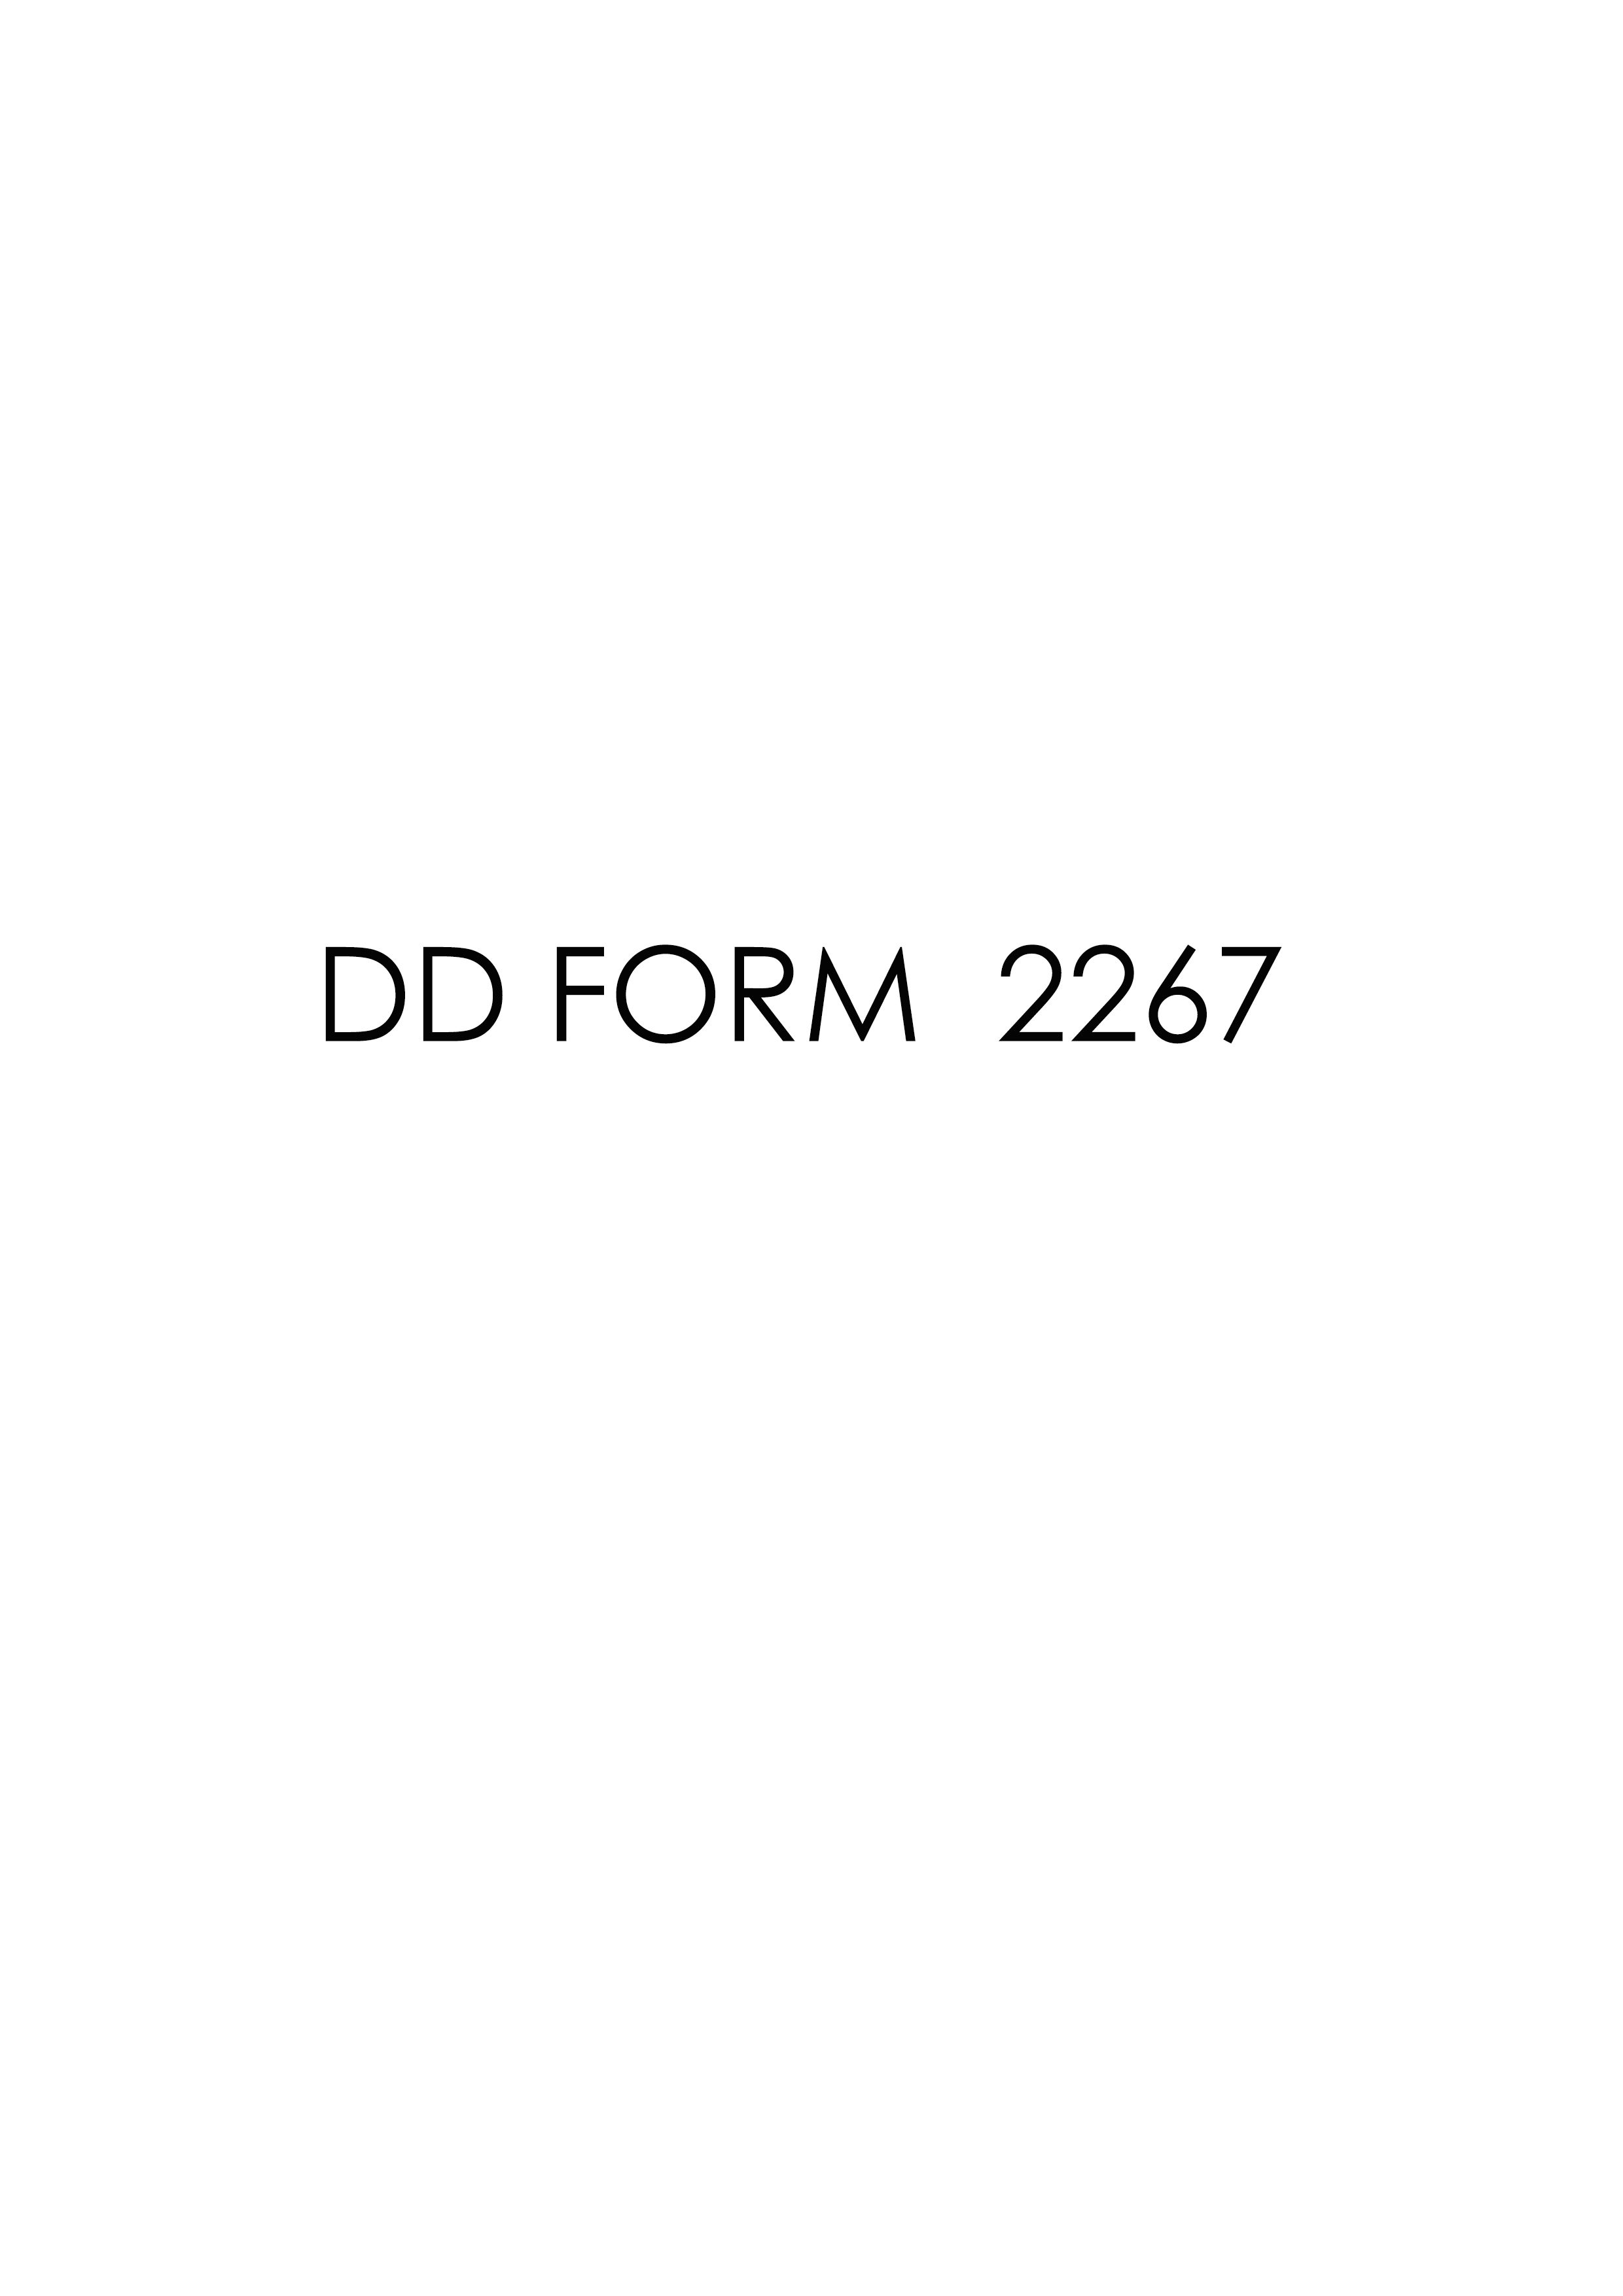 Download Fillable dd Form 2267